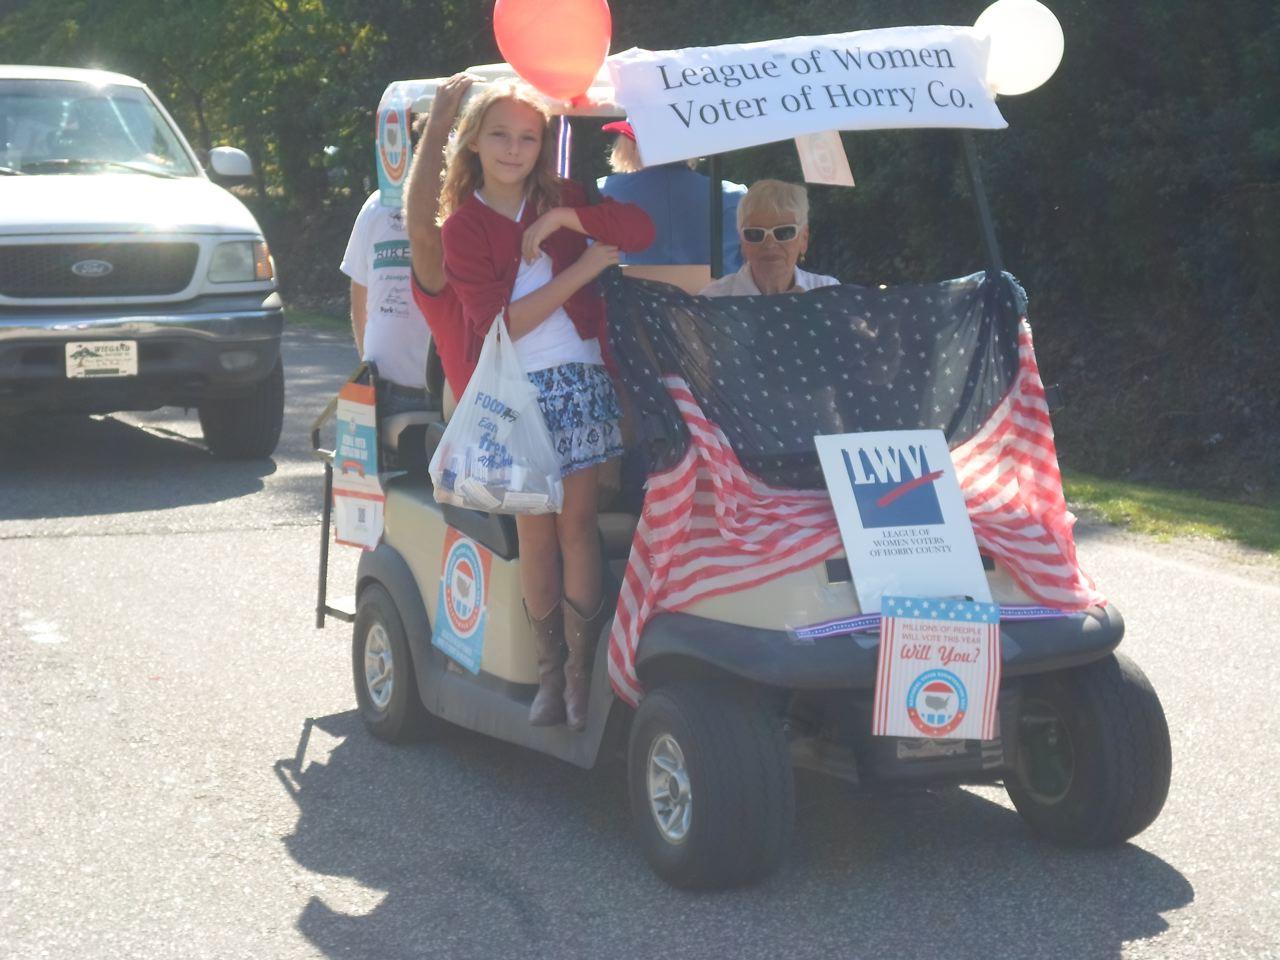 Greeting current and future voters at the Aynor Hoe Down Parade, Sep 2015